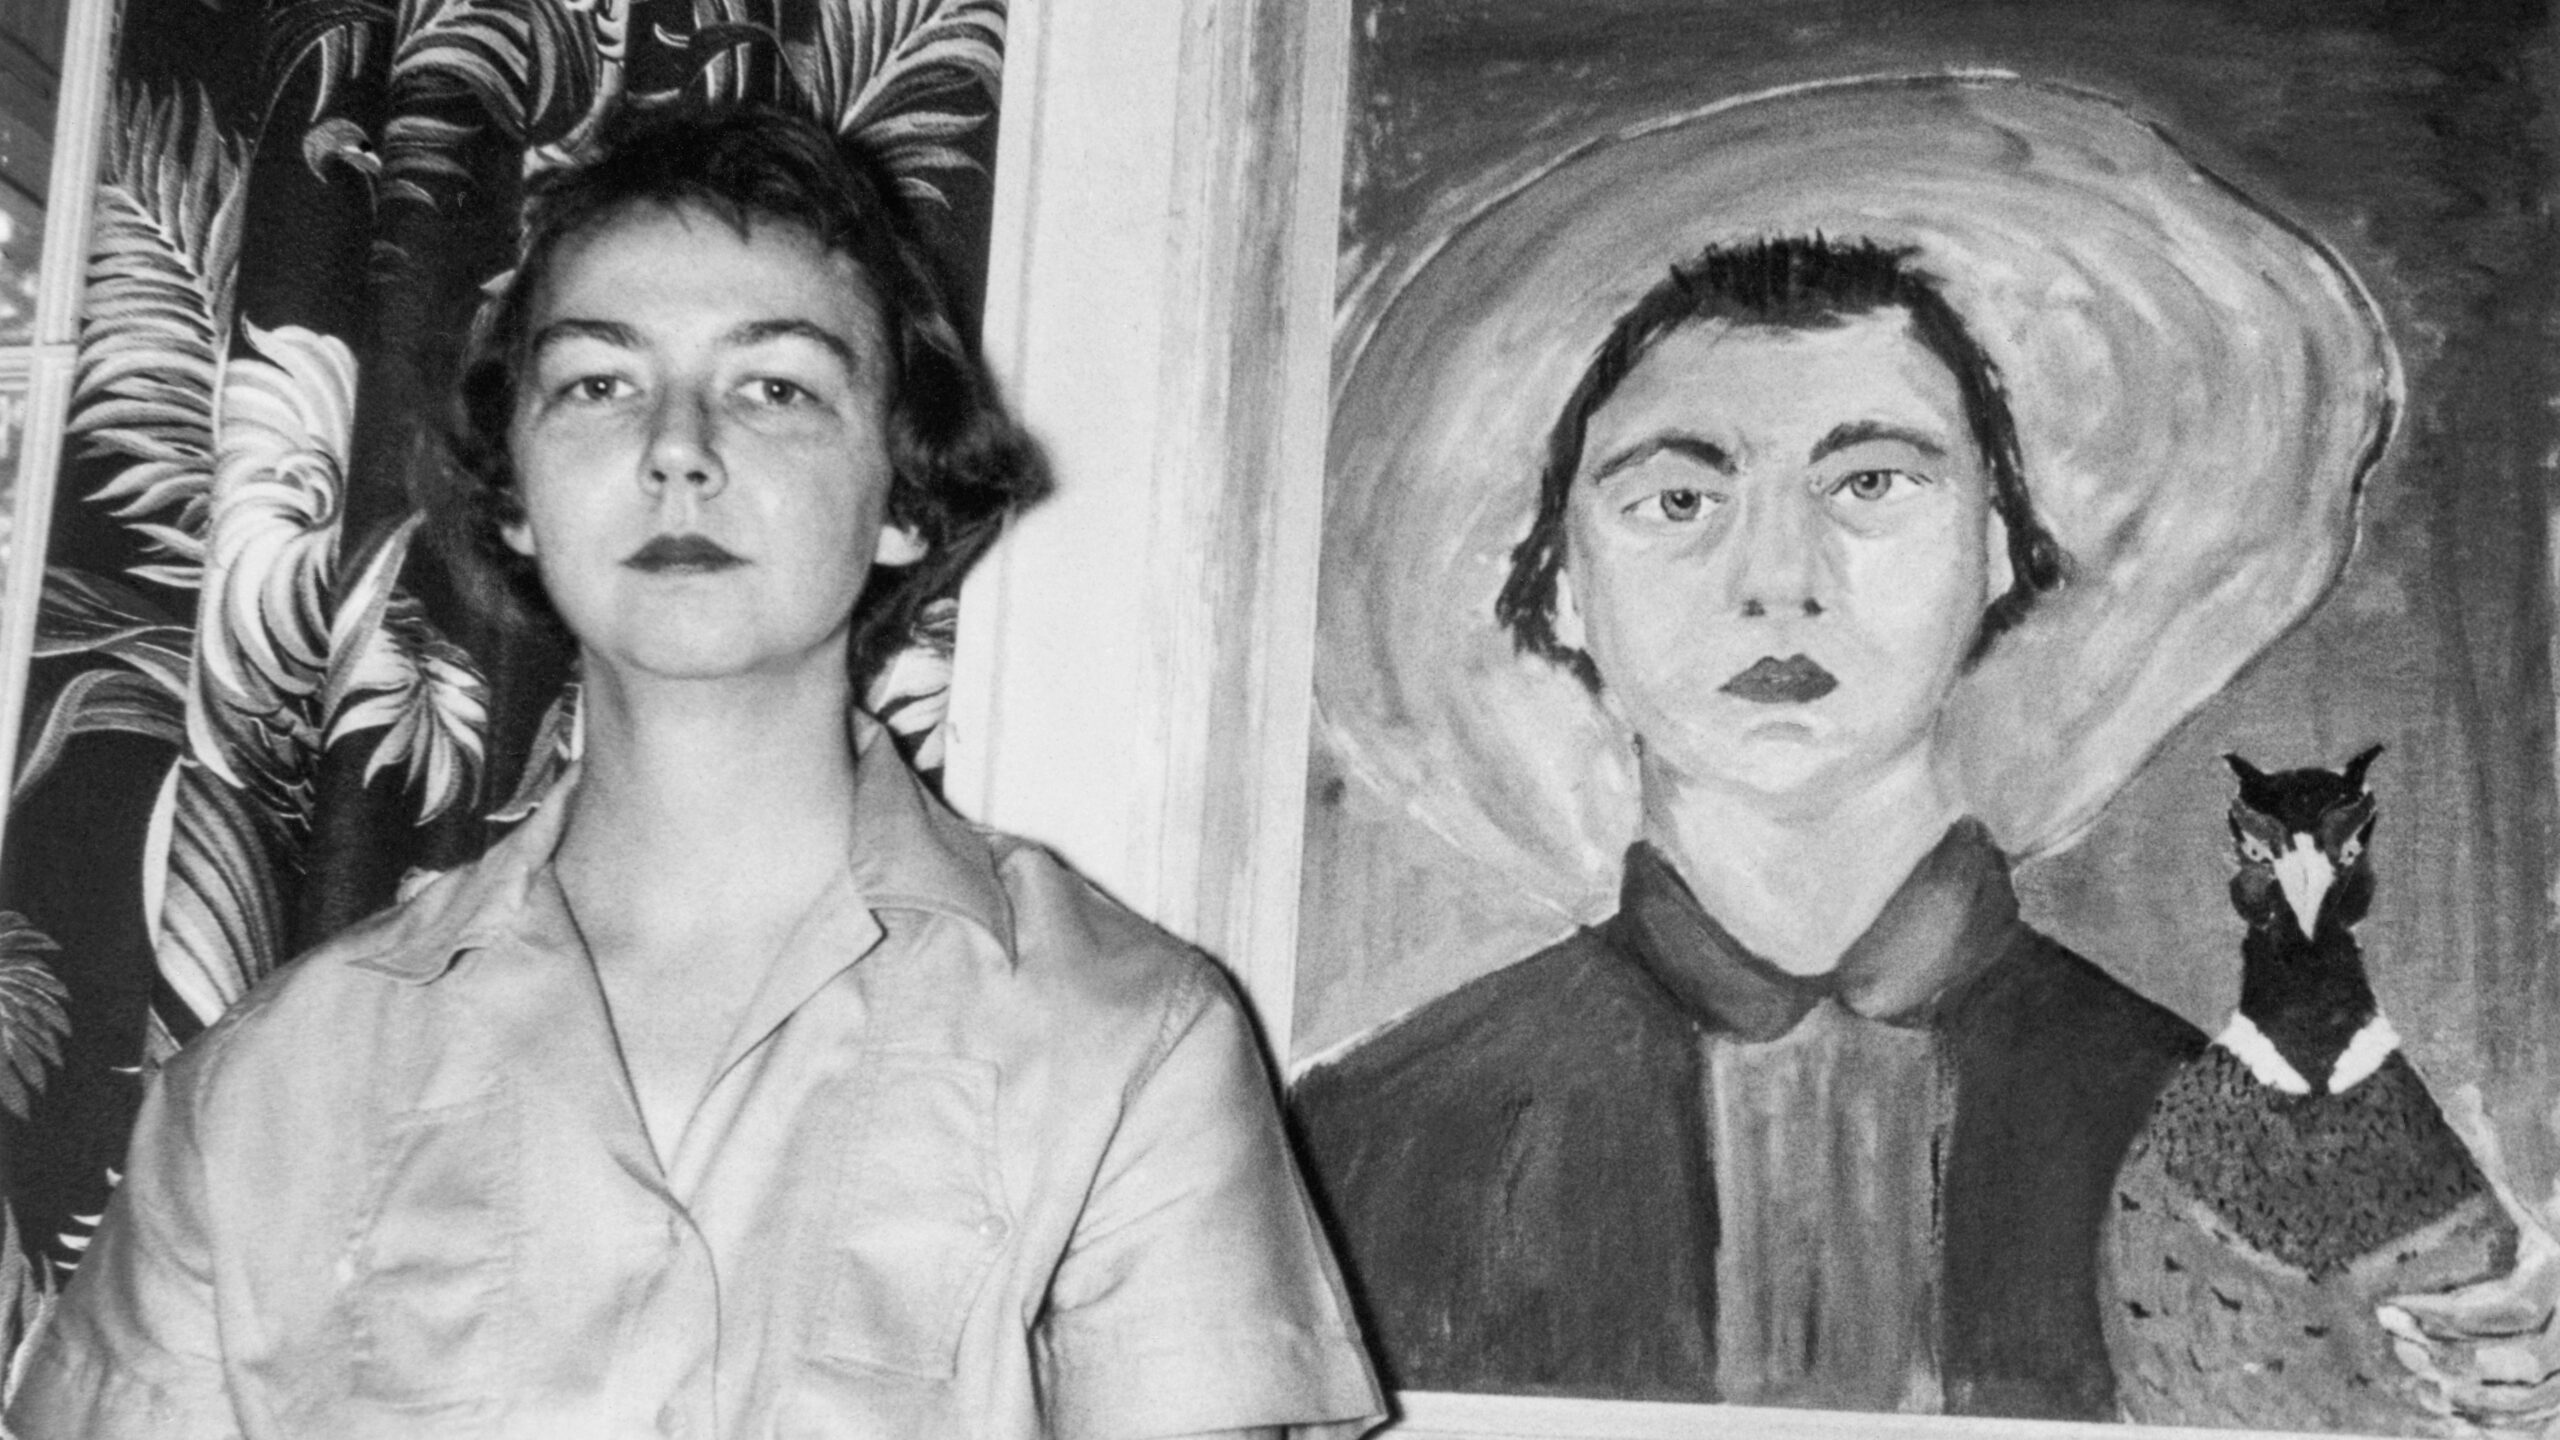 Flannery O'Connor with a painting of herself